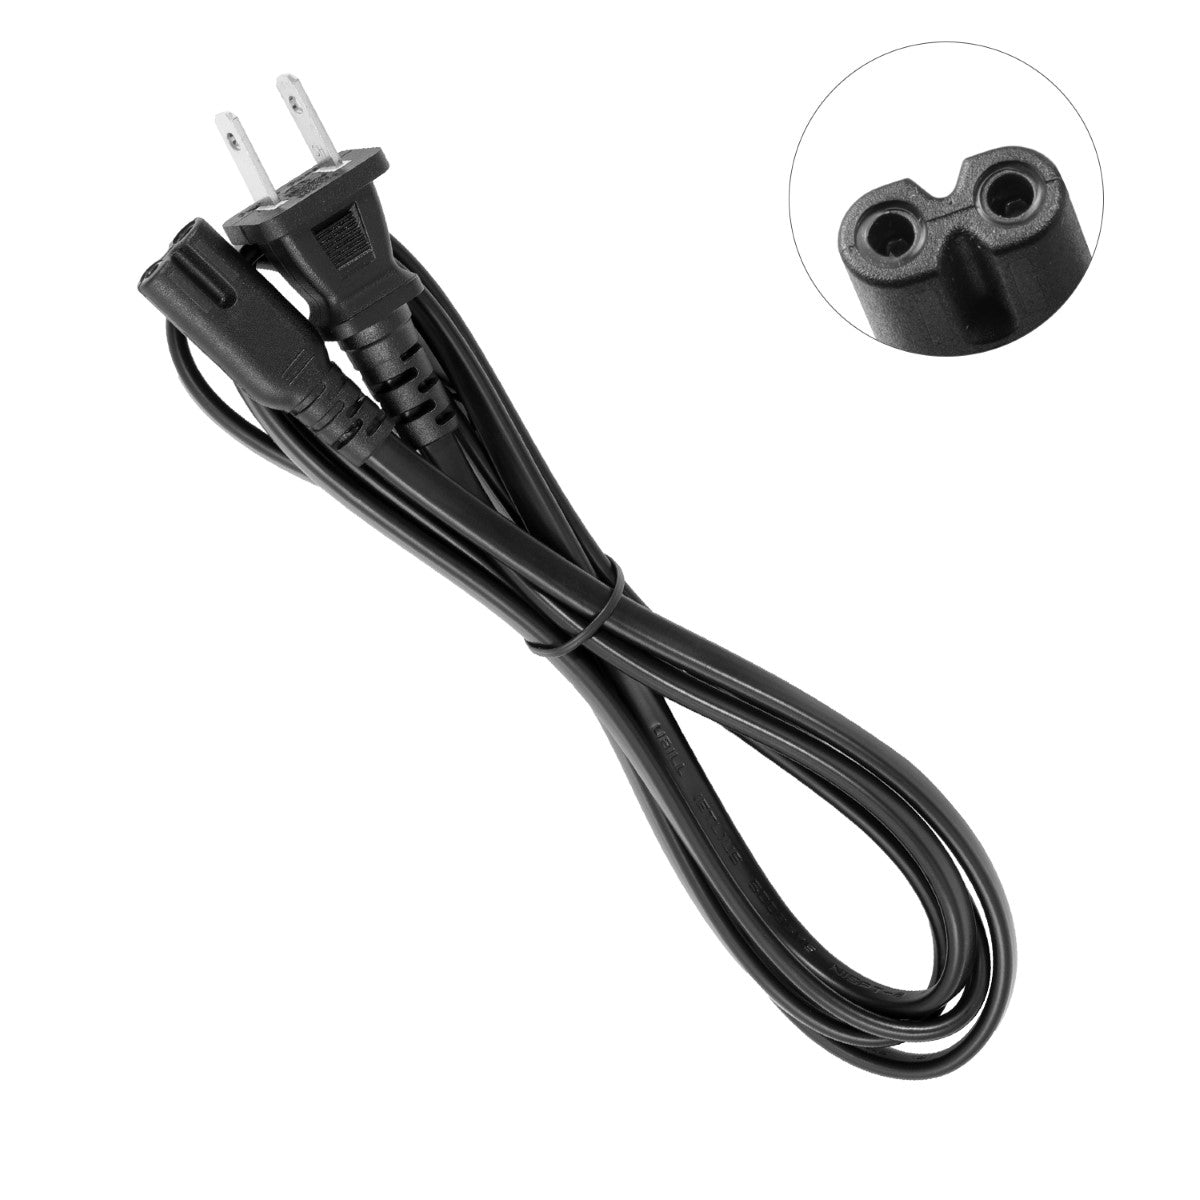 Power Cord for HP ENVY 4520 e-All-in-One Printer.